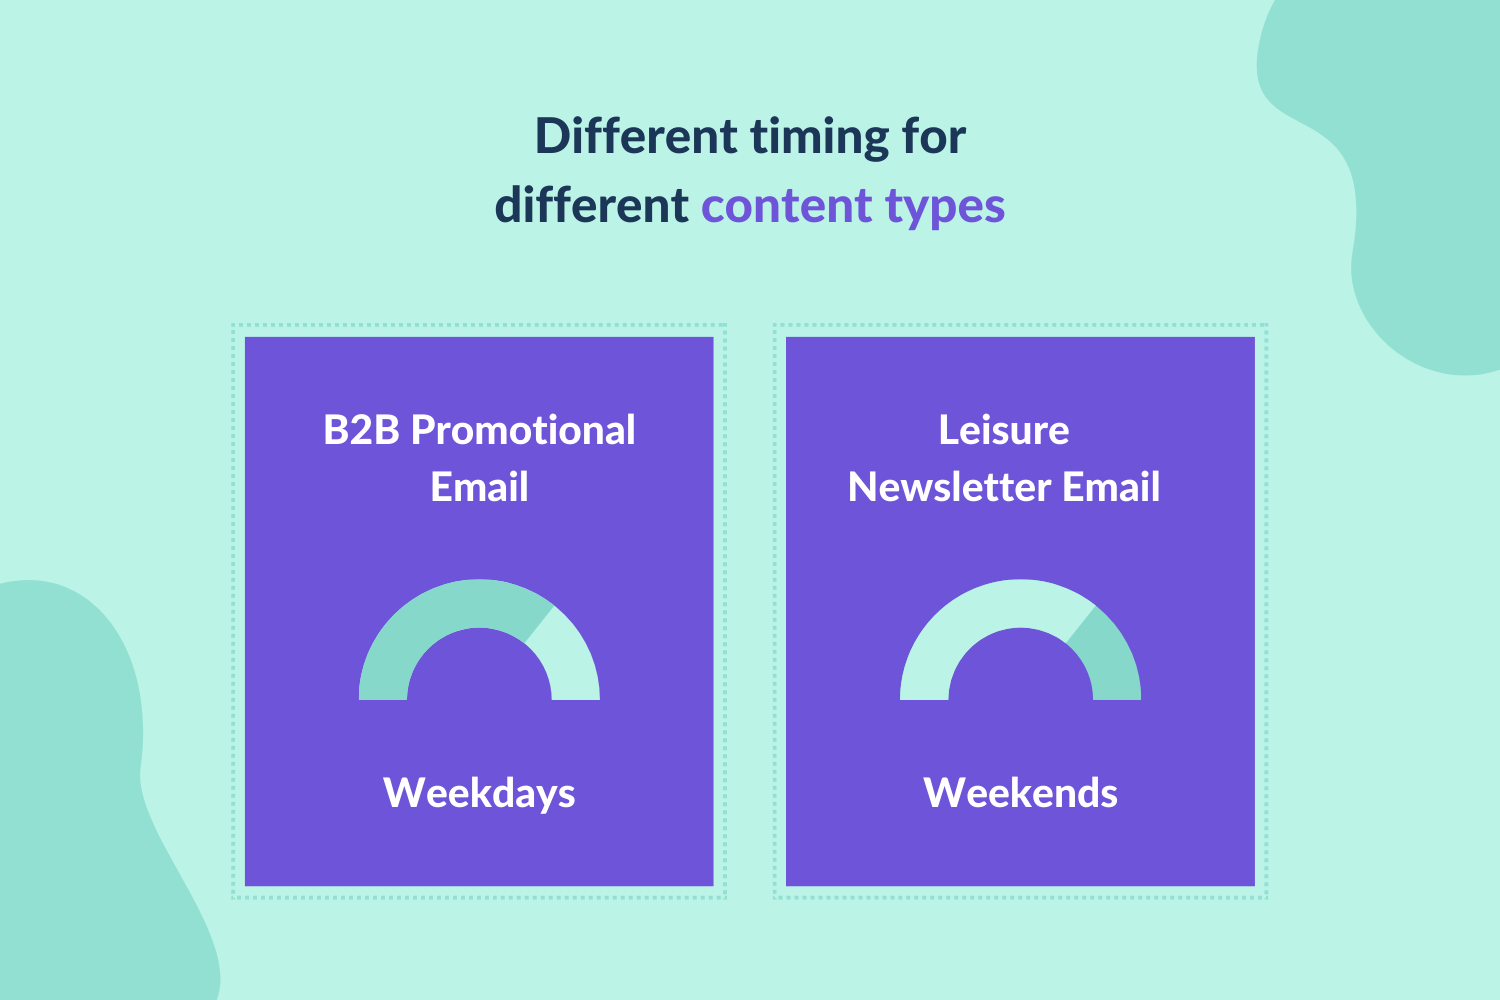 Email timing based on content types